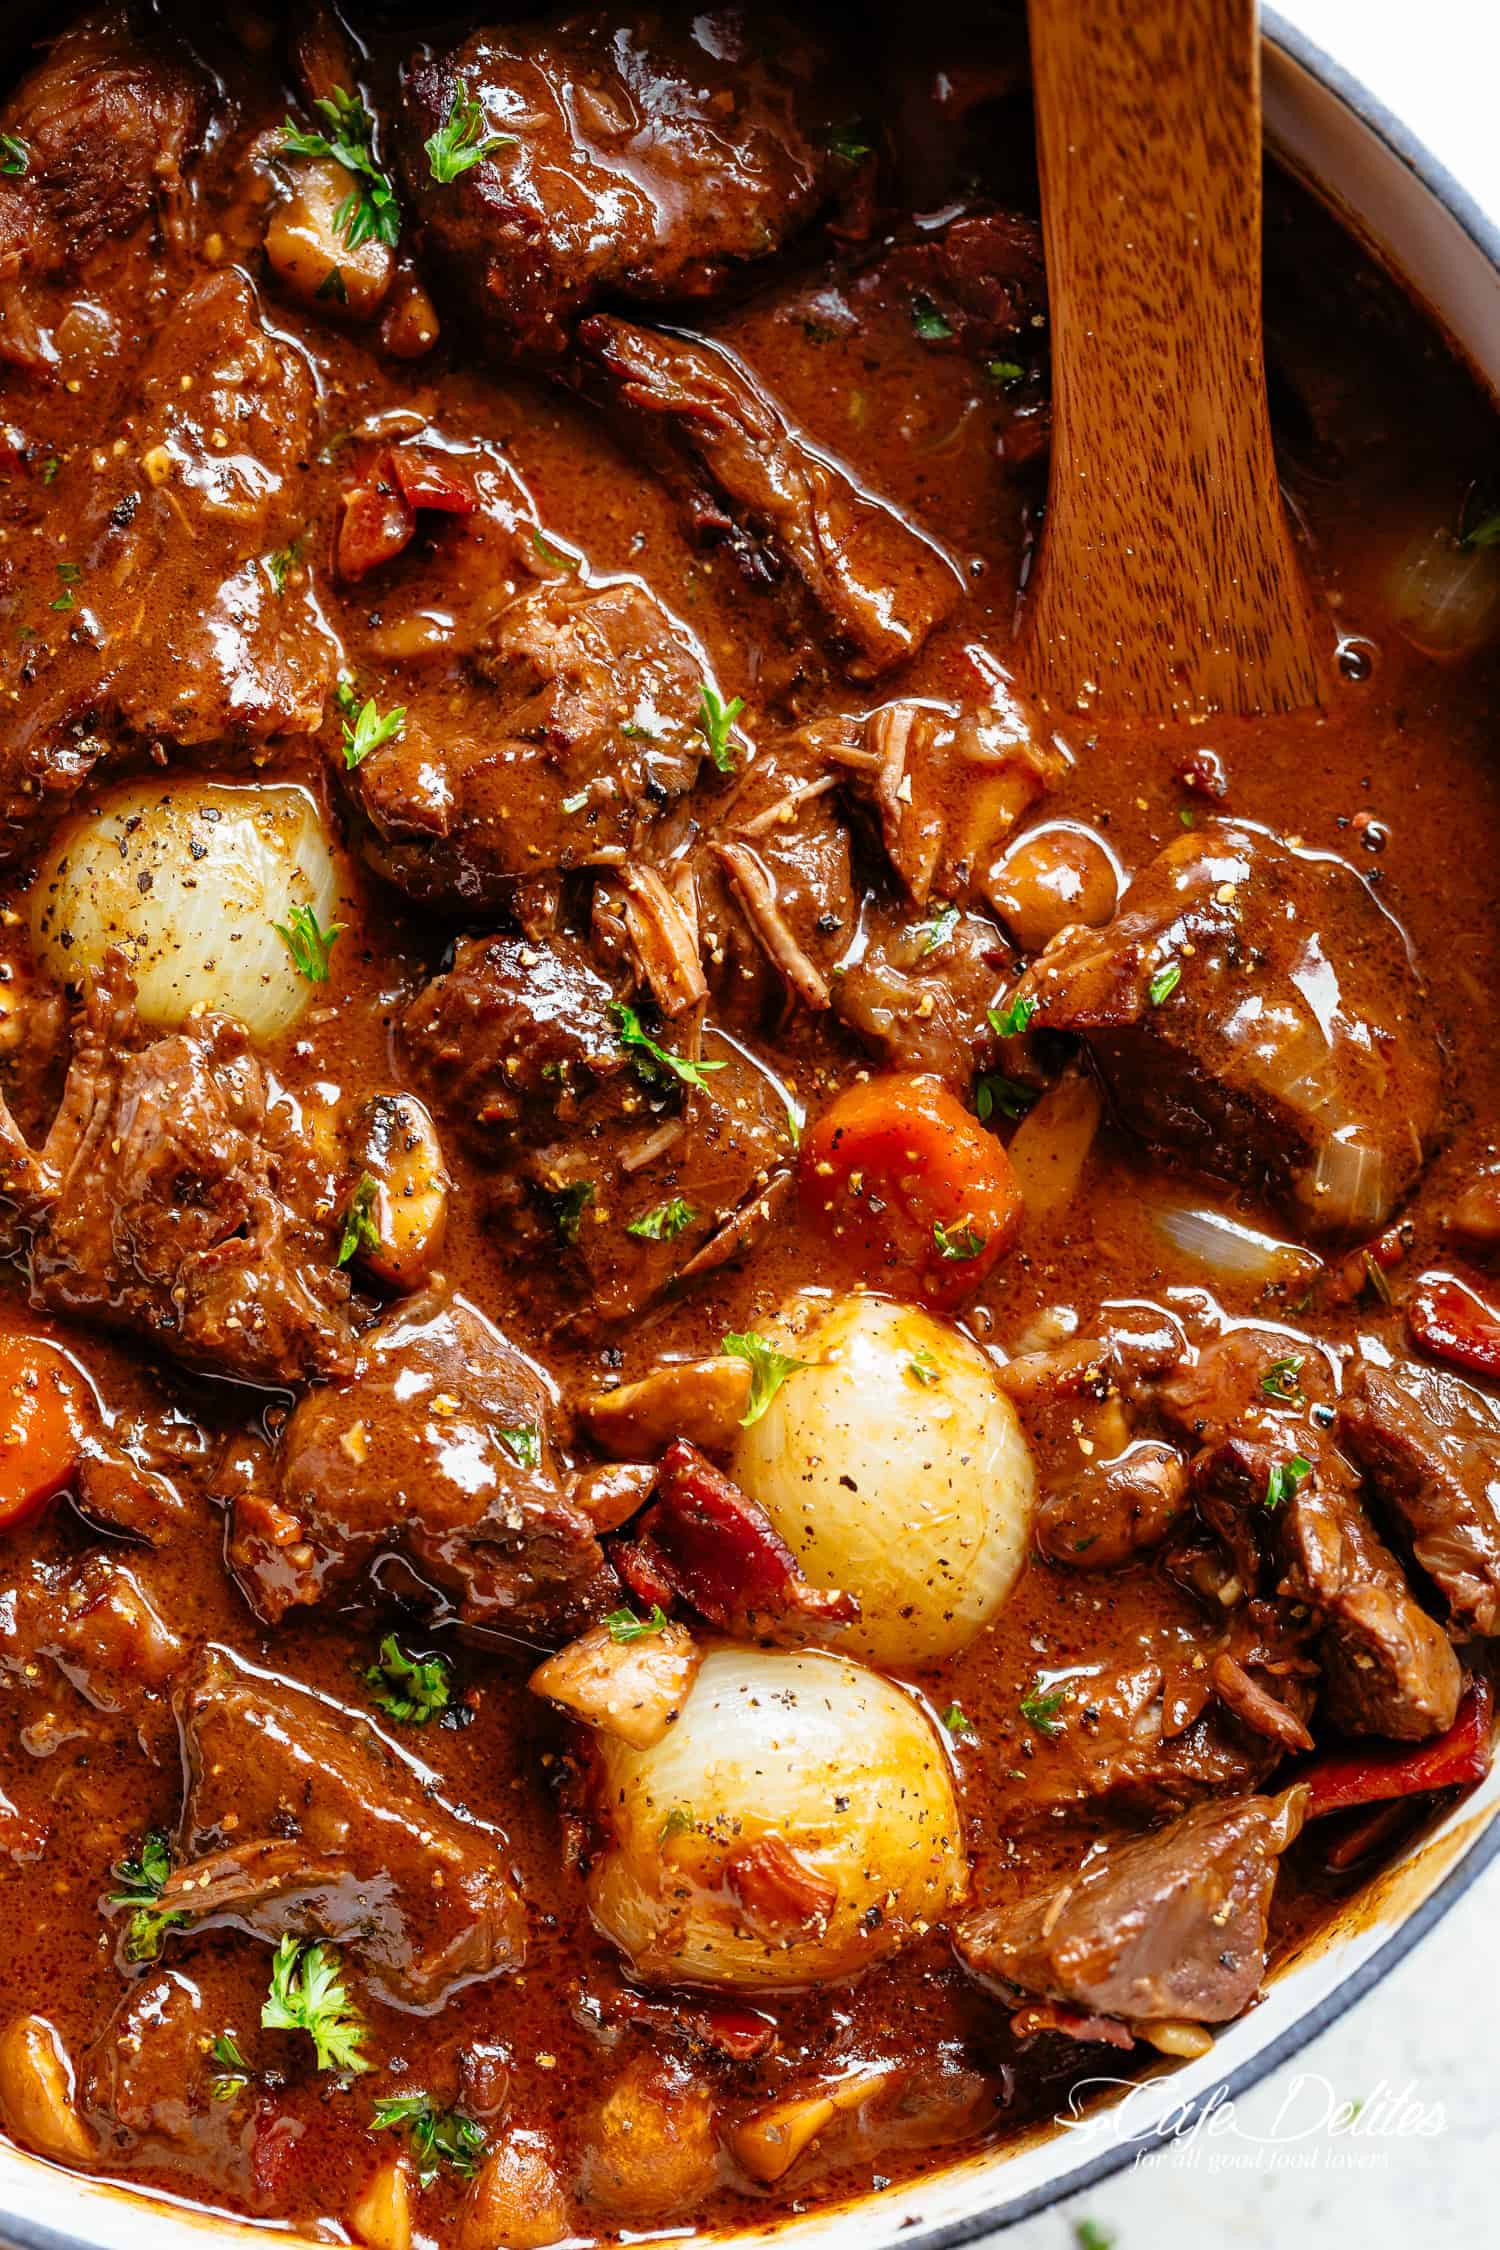 Tender fall apart chunks of beef simmered in a rich red wine gravy makes Julia Child's Beef Bourguignon an incredible family dinner. Slow Cooker, Instant Pot/Pressure Cooker, Stove Top and the traditional Oven method included! Easy to make, every step is worth it | cafedelites.com